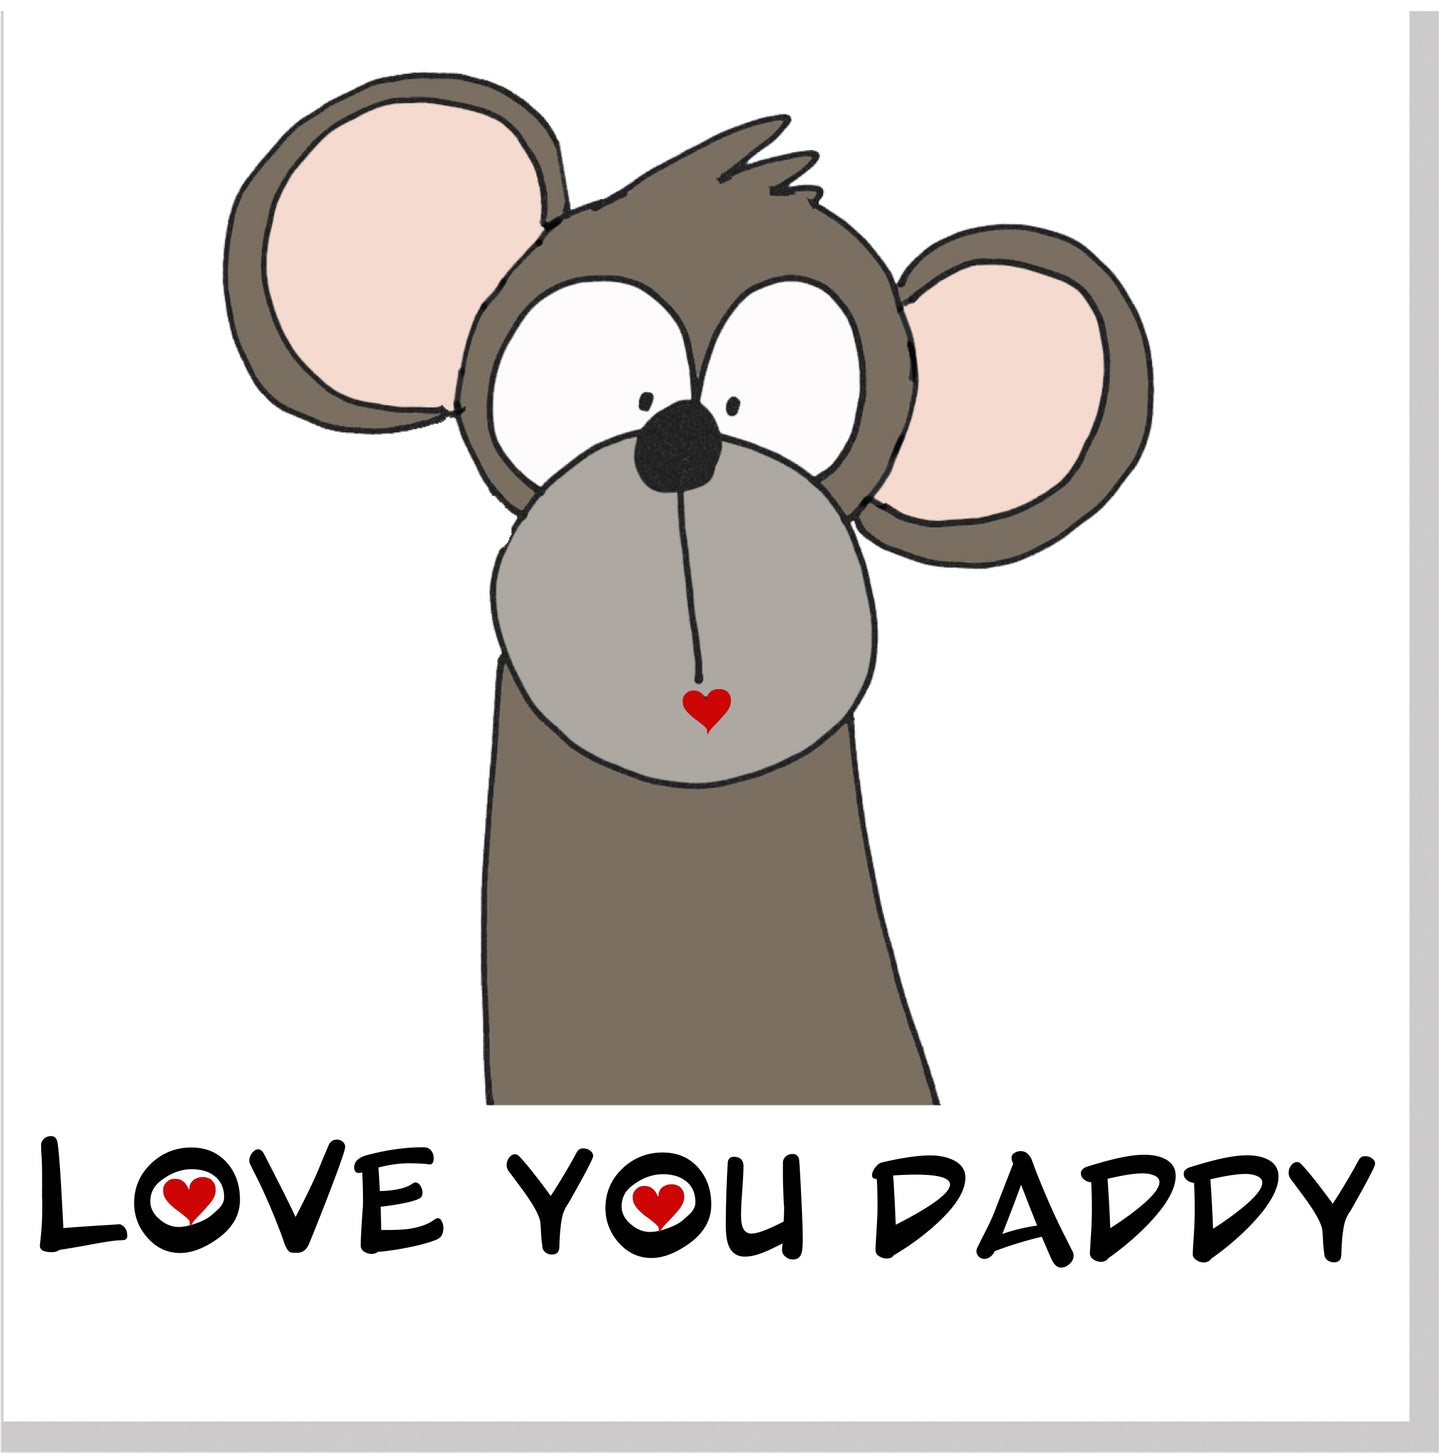 Love you Daddy Monkey square card